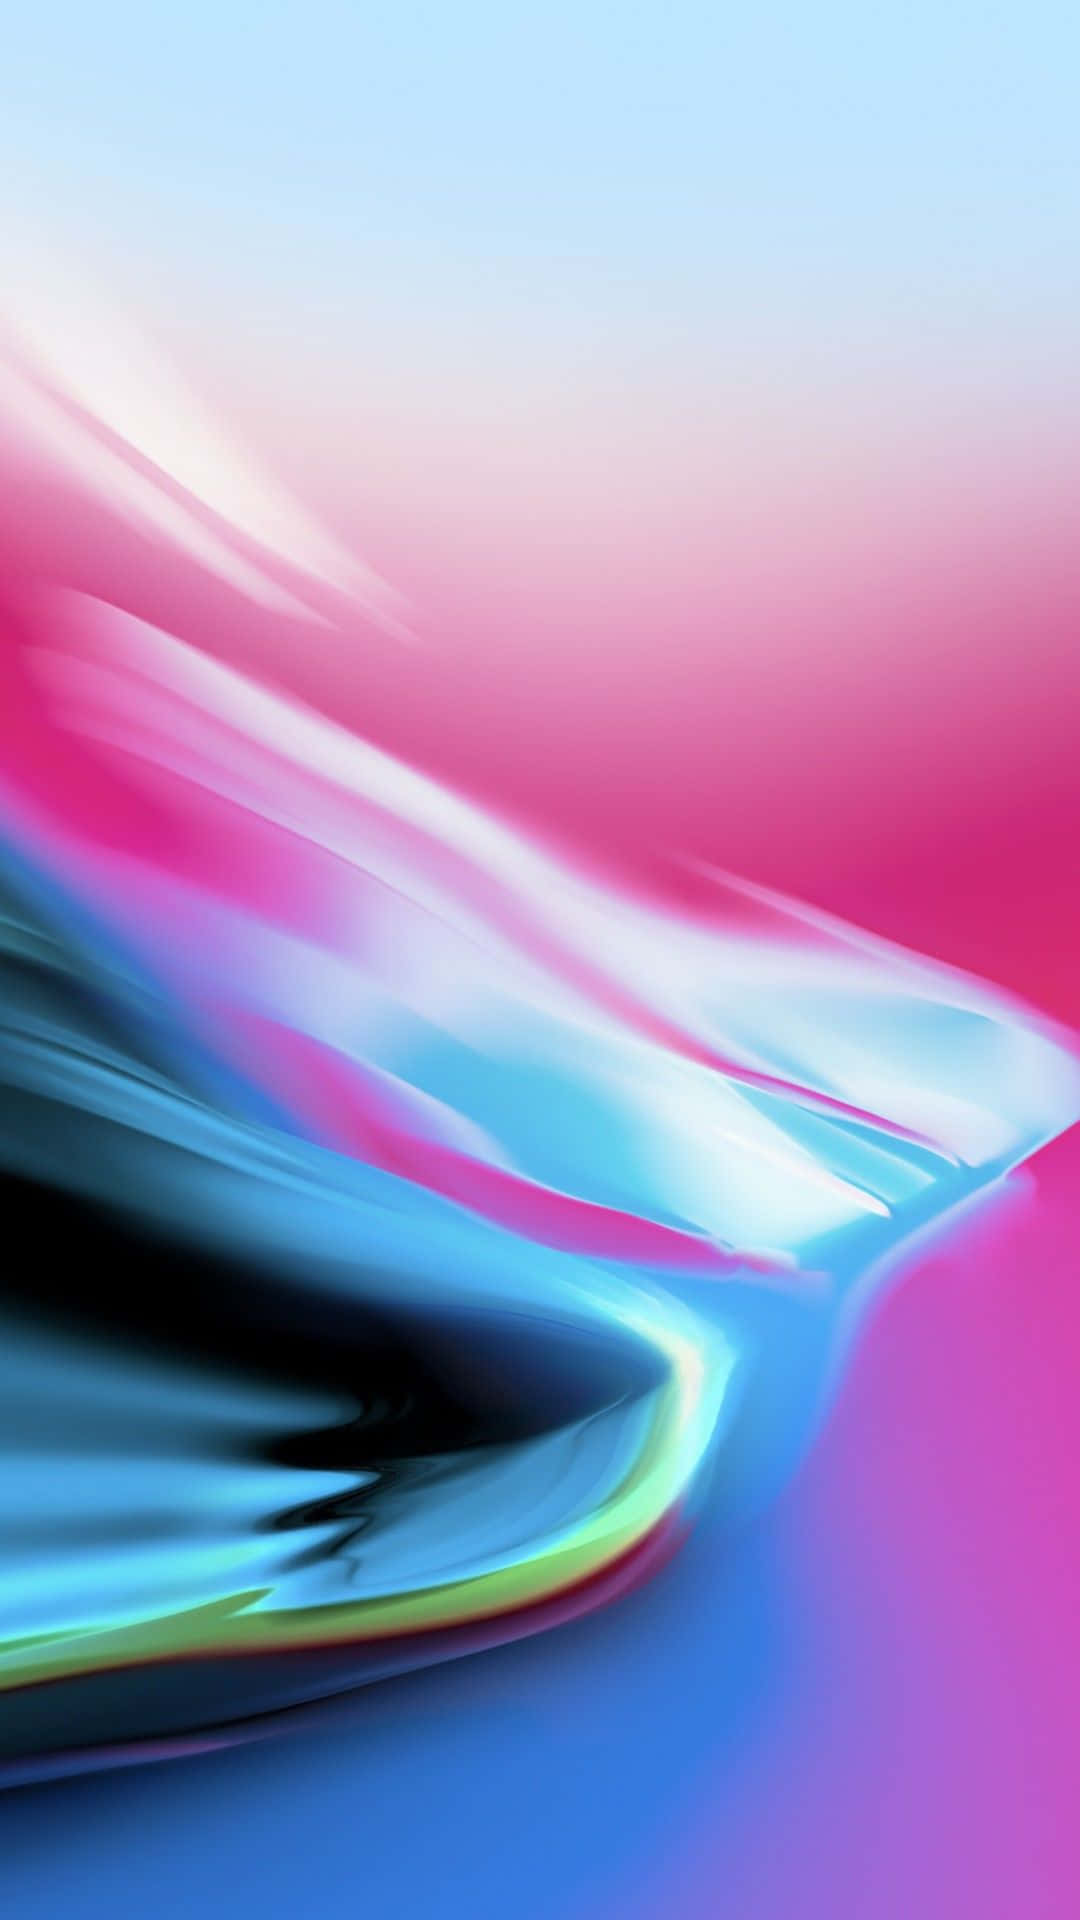 Welcome the Apple Iphone 8 Plus Wallpaper